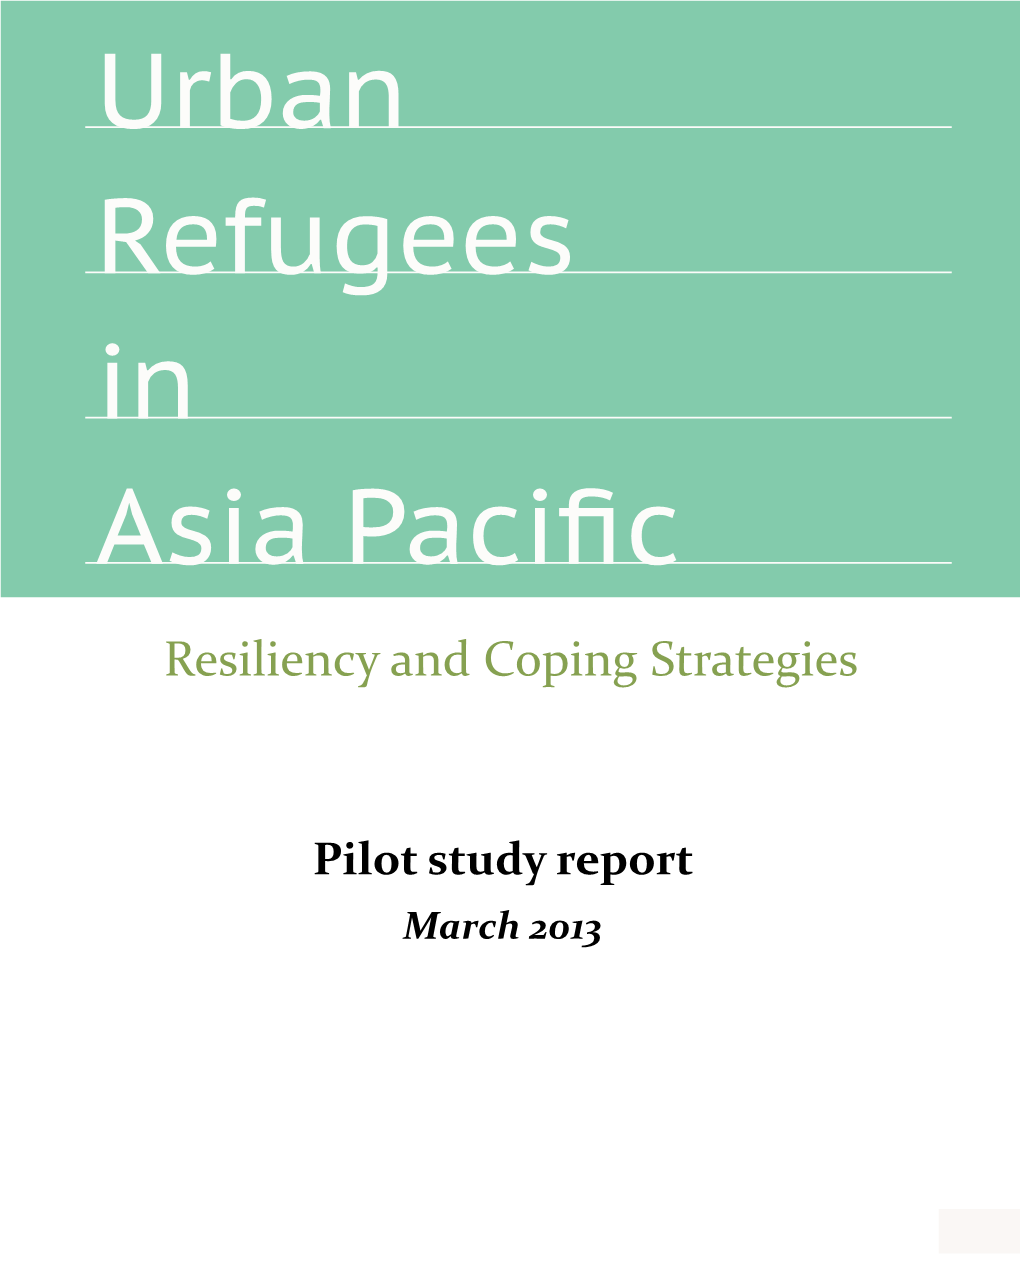 Urban Refugees in Asia Pacific Resiliency and Coping Strategies